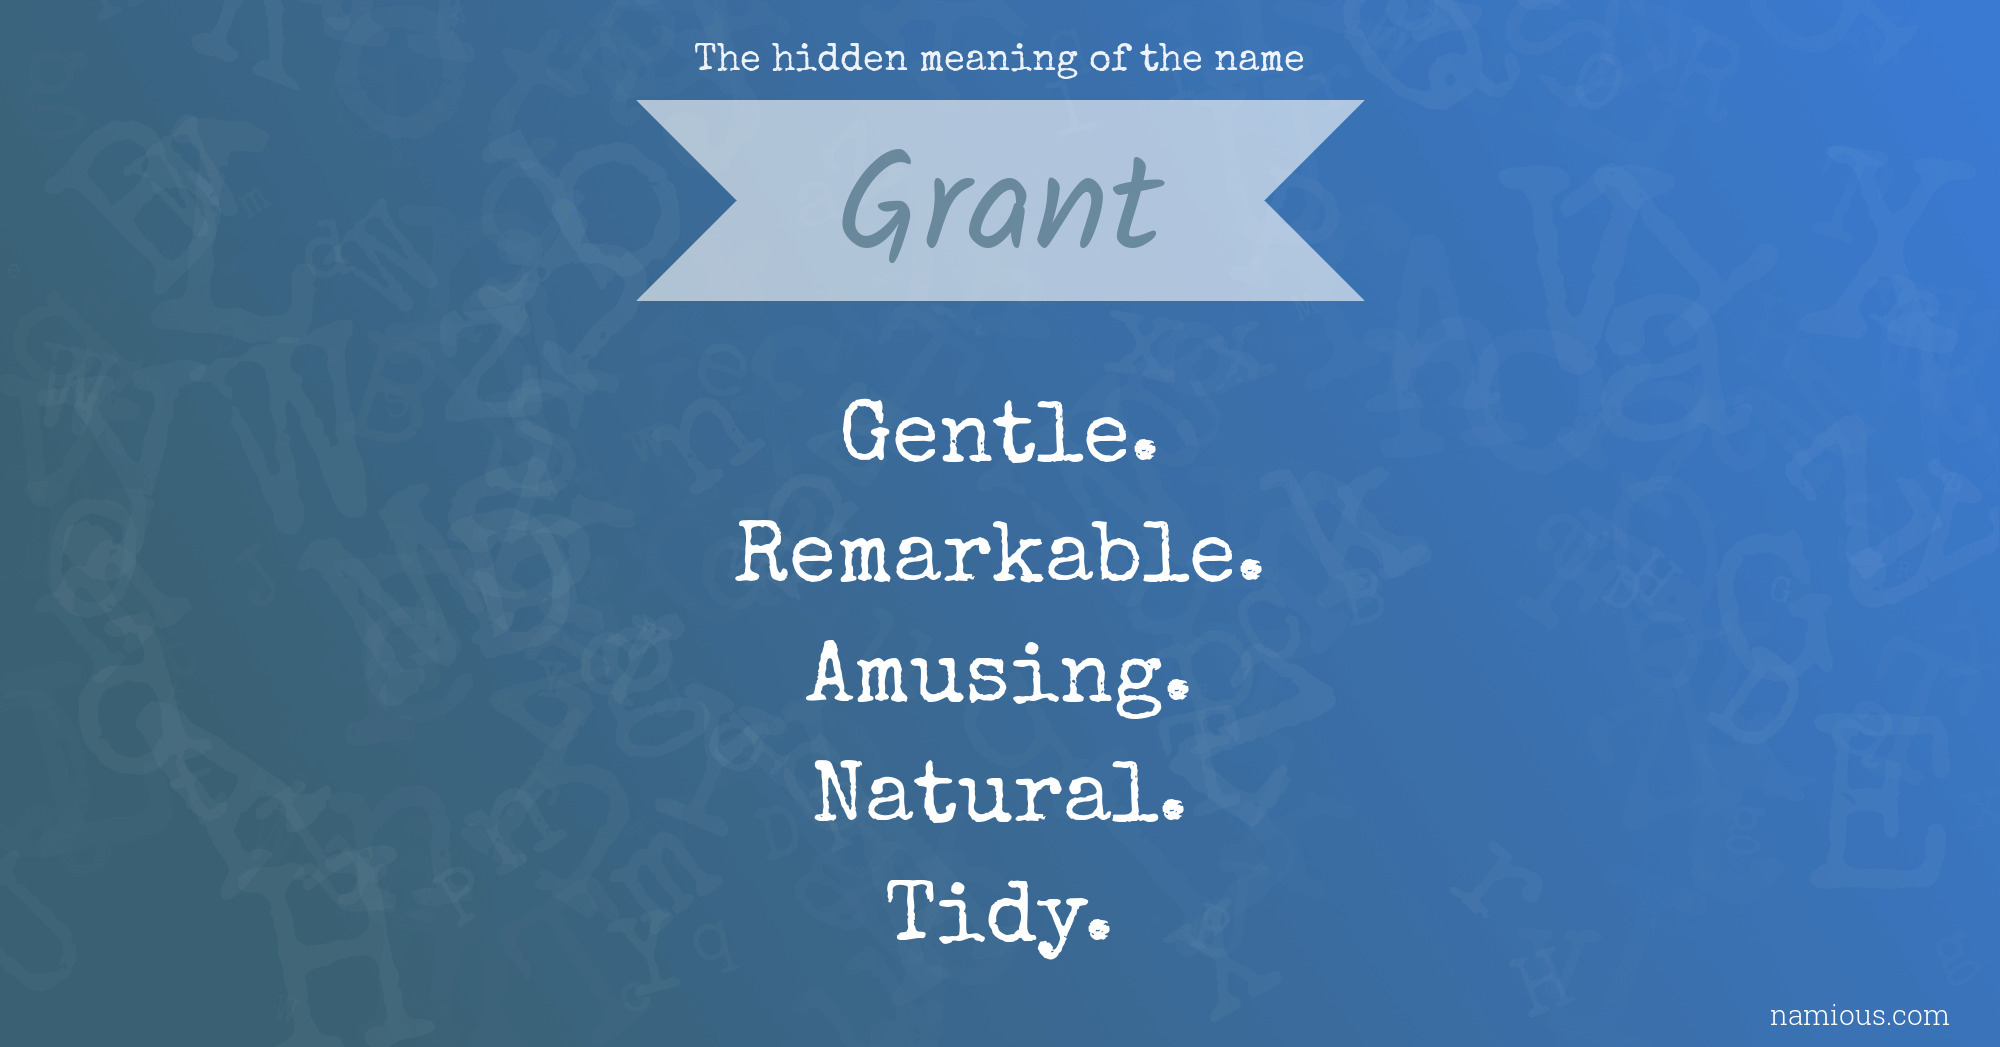 The hidden meaning of the name Grant